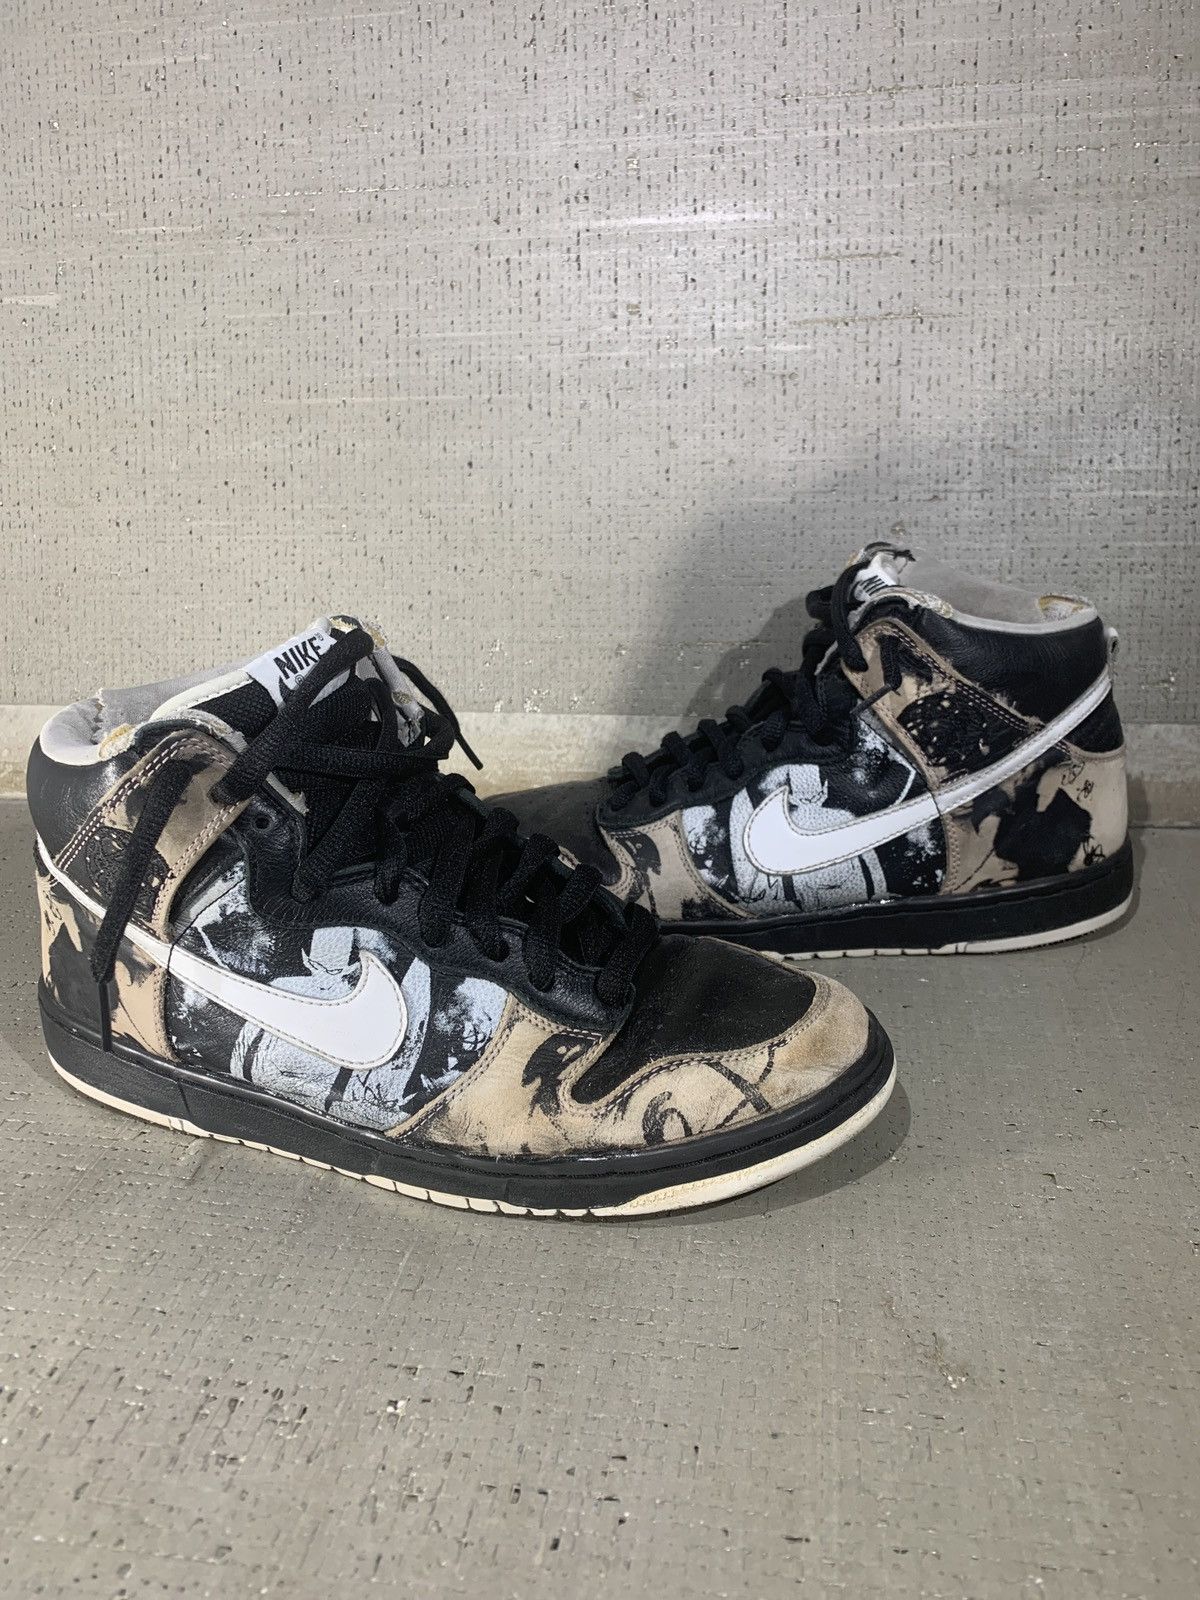 Nike Futura x UNKLE x Dunk High Pro SB Unkle 2004 | Grailed